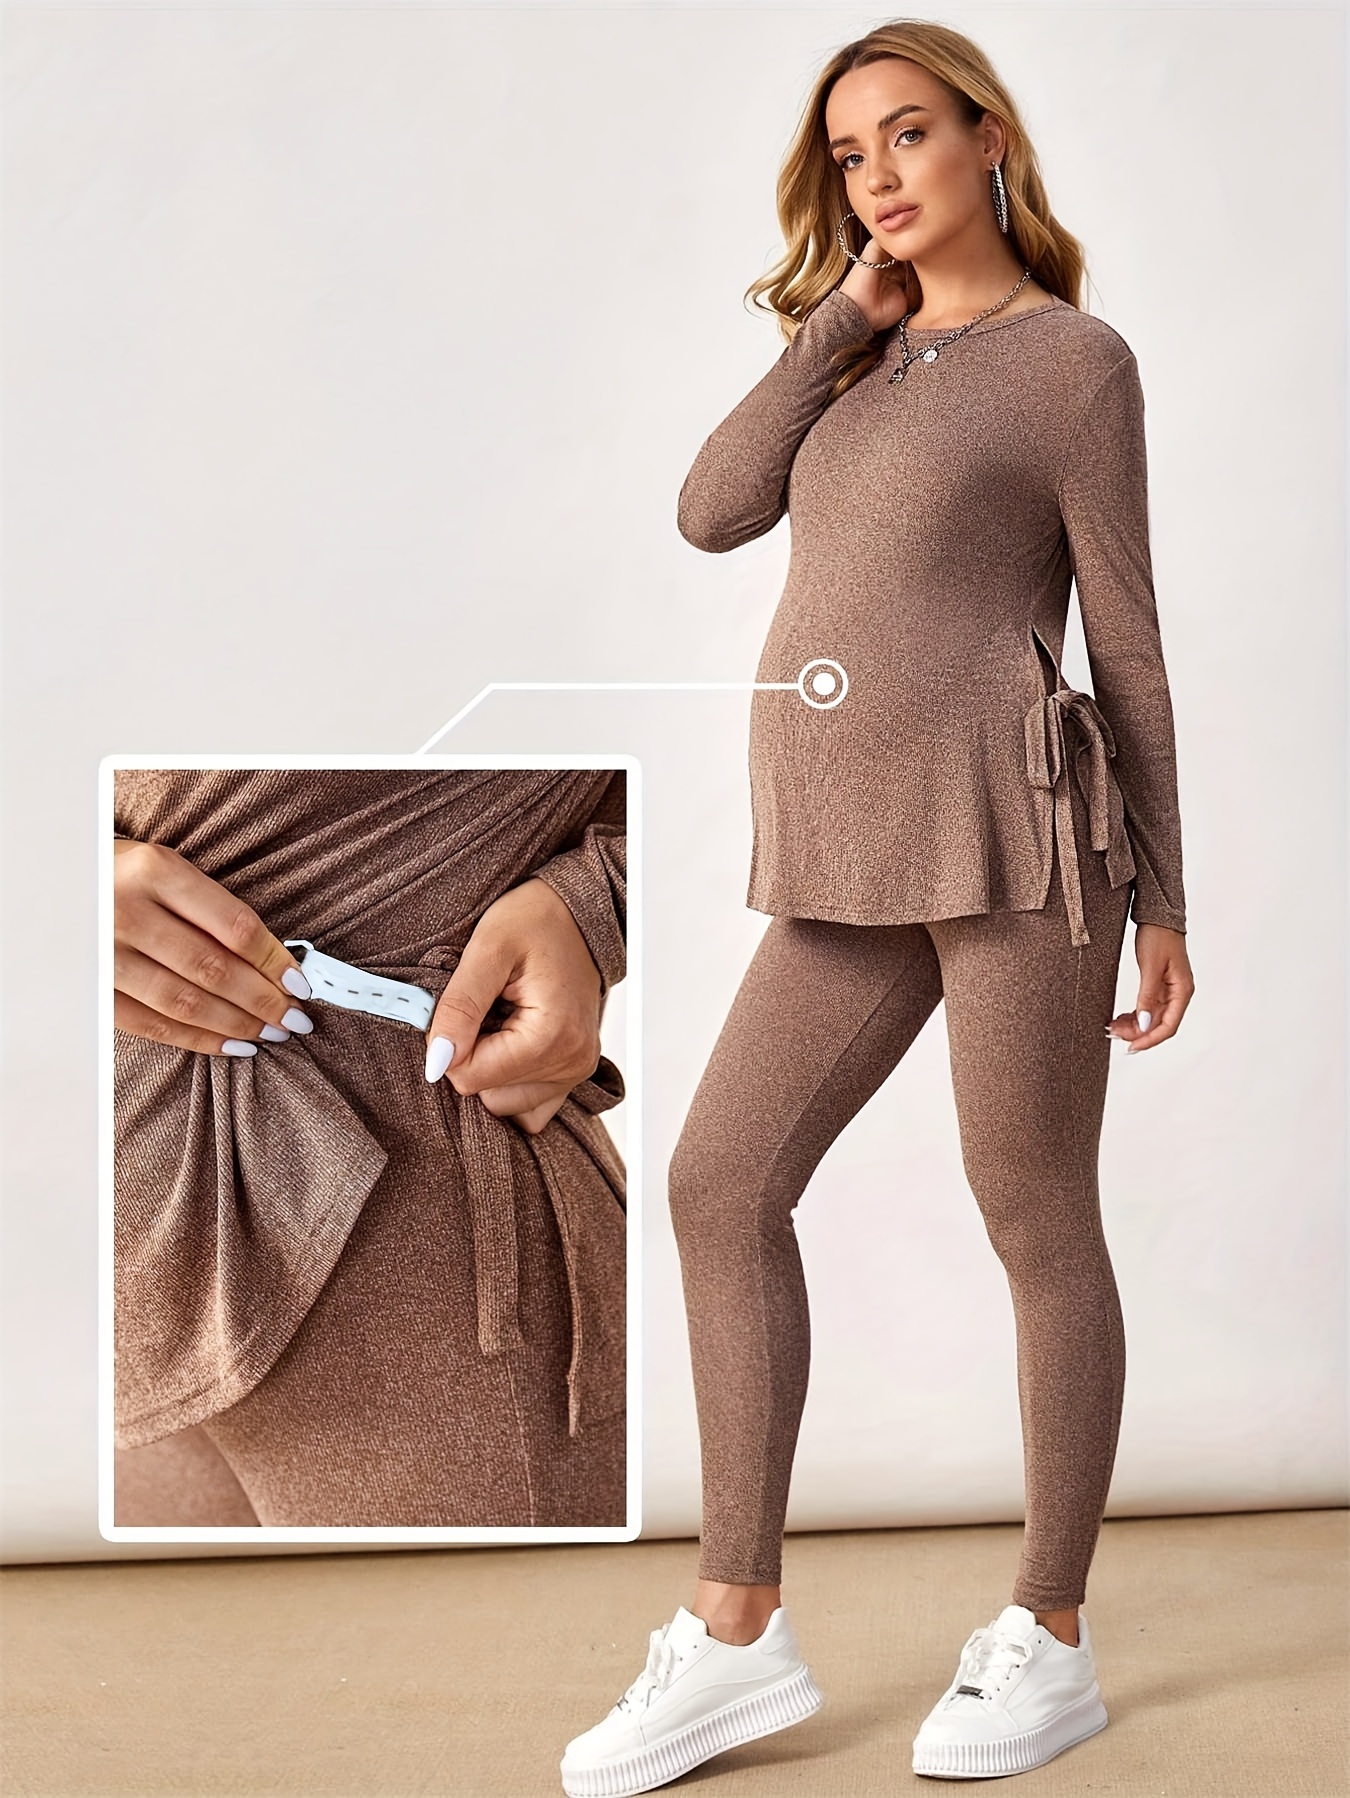 40 Winter Maternity Dresses for Bundling a Baby Bump